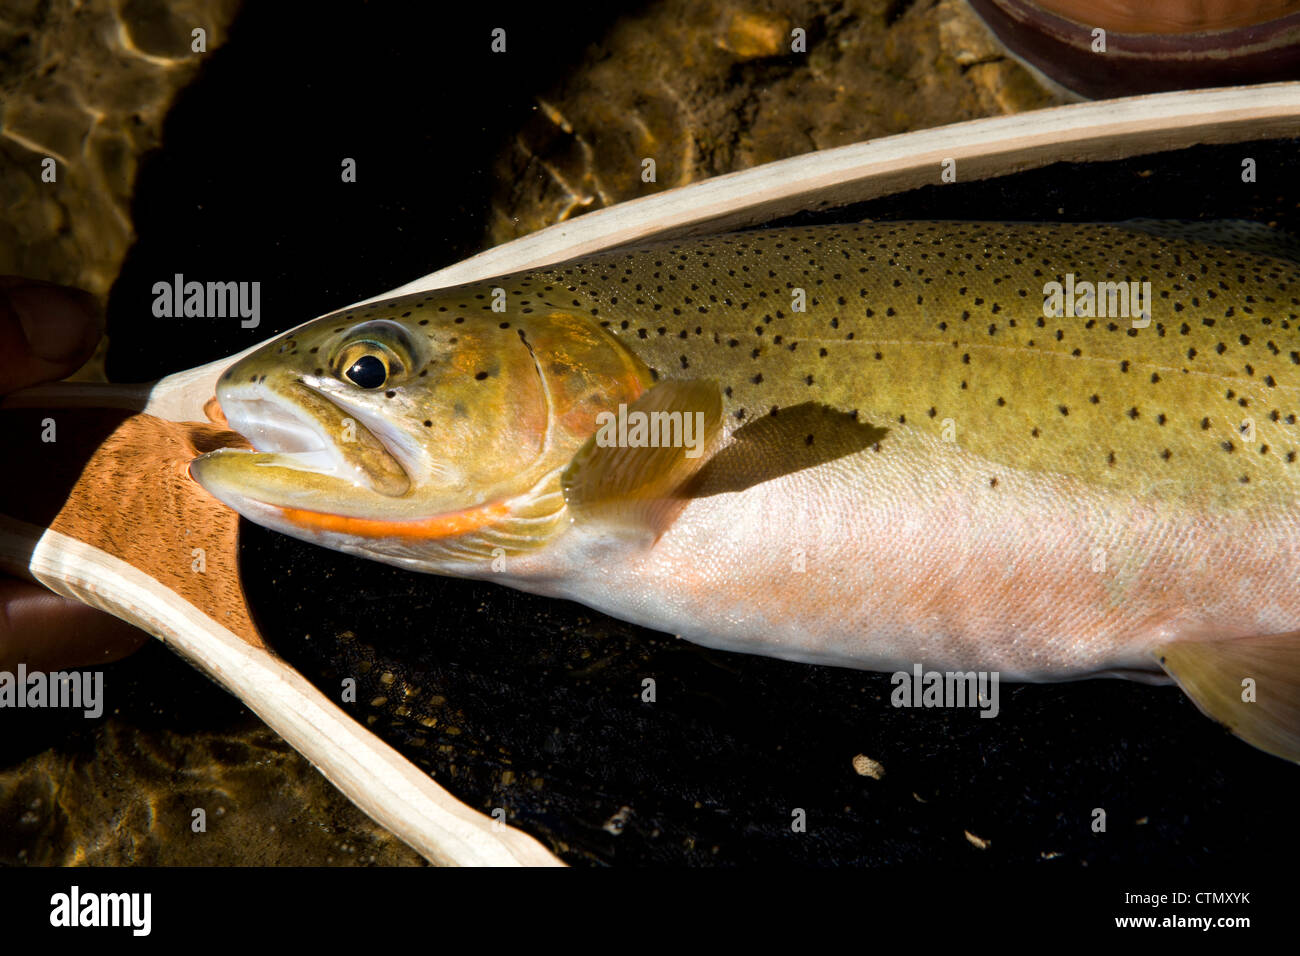 Fish Facts: Colorado River Cutthroat Trout (Oncorhyncus clarkii